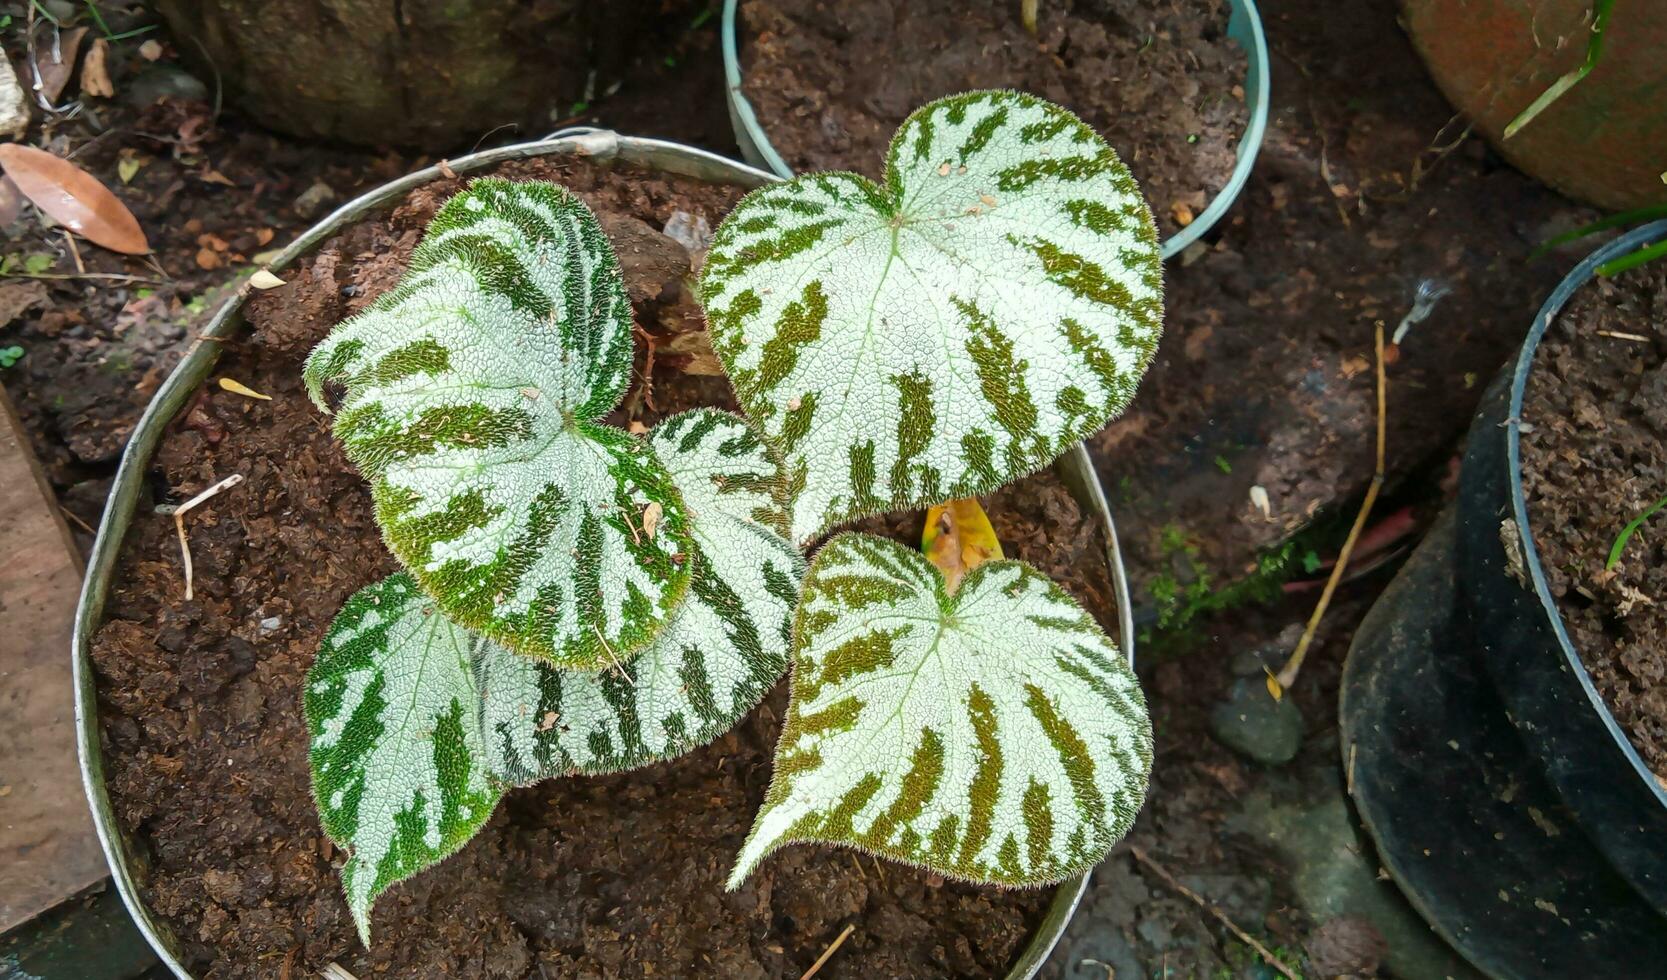 Begonia chloroneura in potted. Begonia chloroneura is a species of plant in the family Begoniaceae. Beautiful ornamental plant, house plant, indoon plant, love shaped leaves. photo